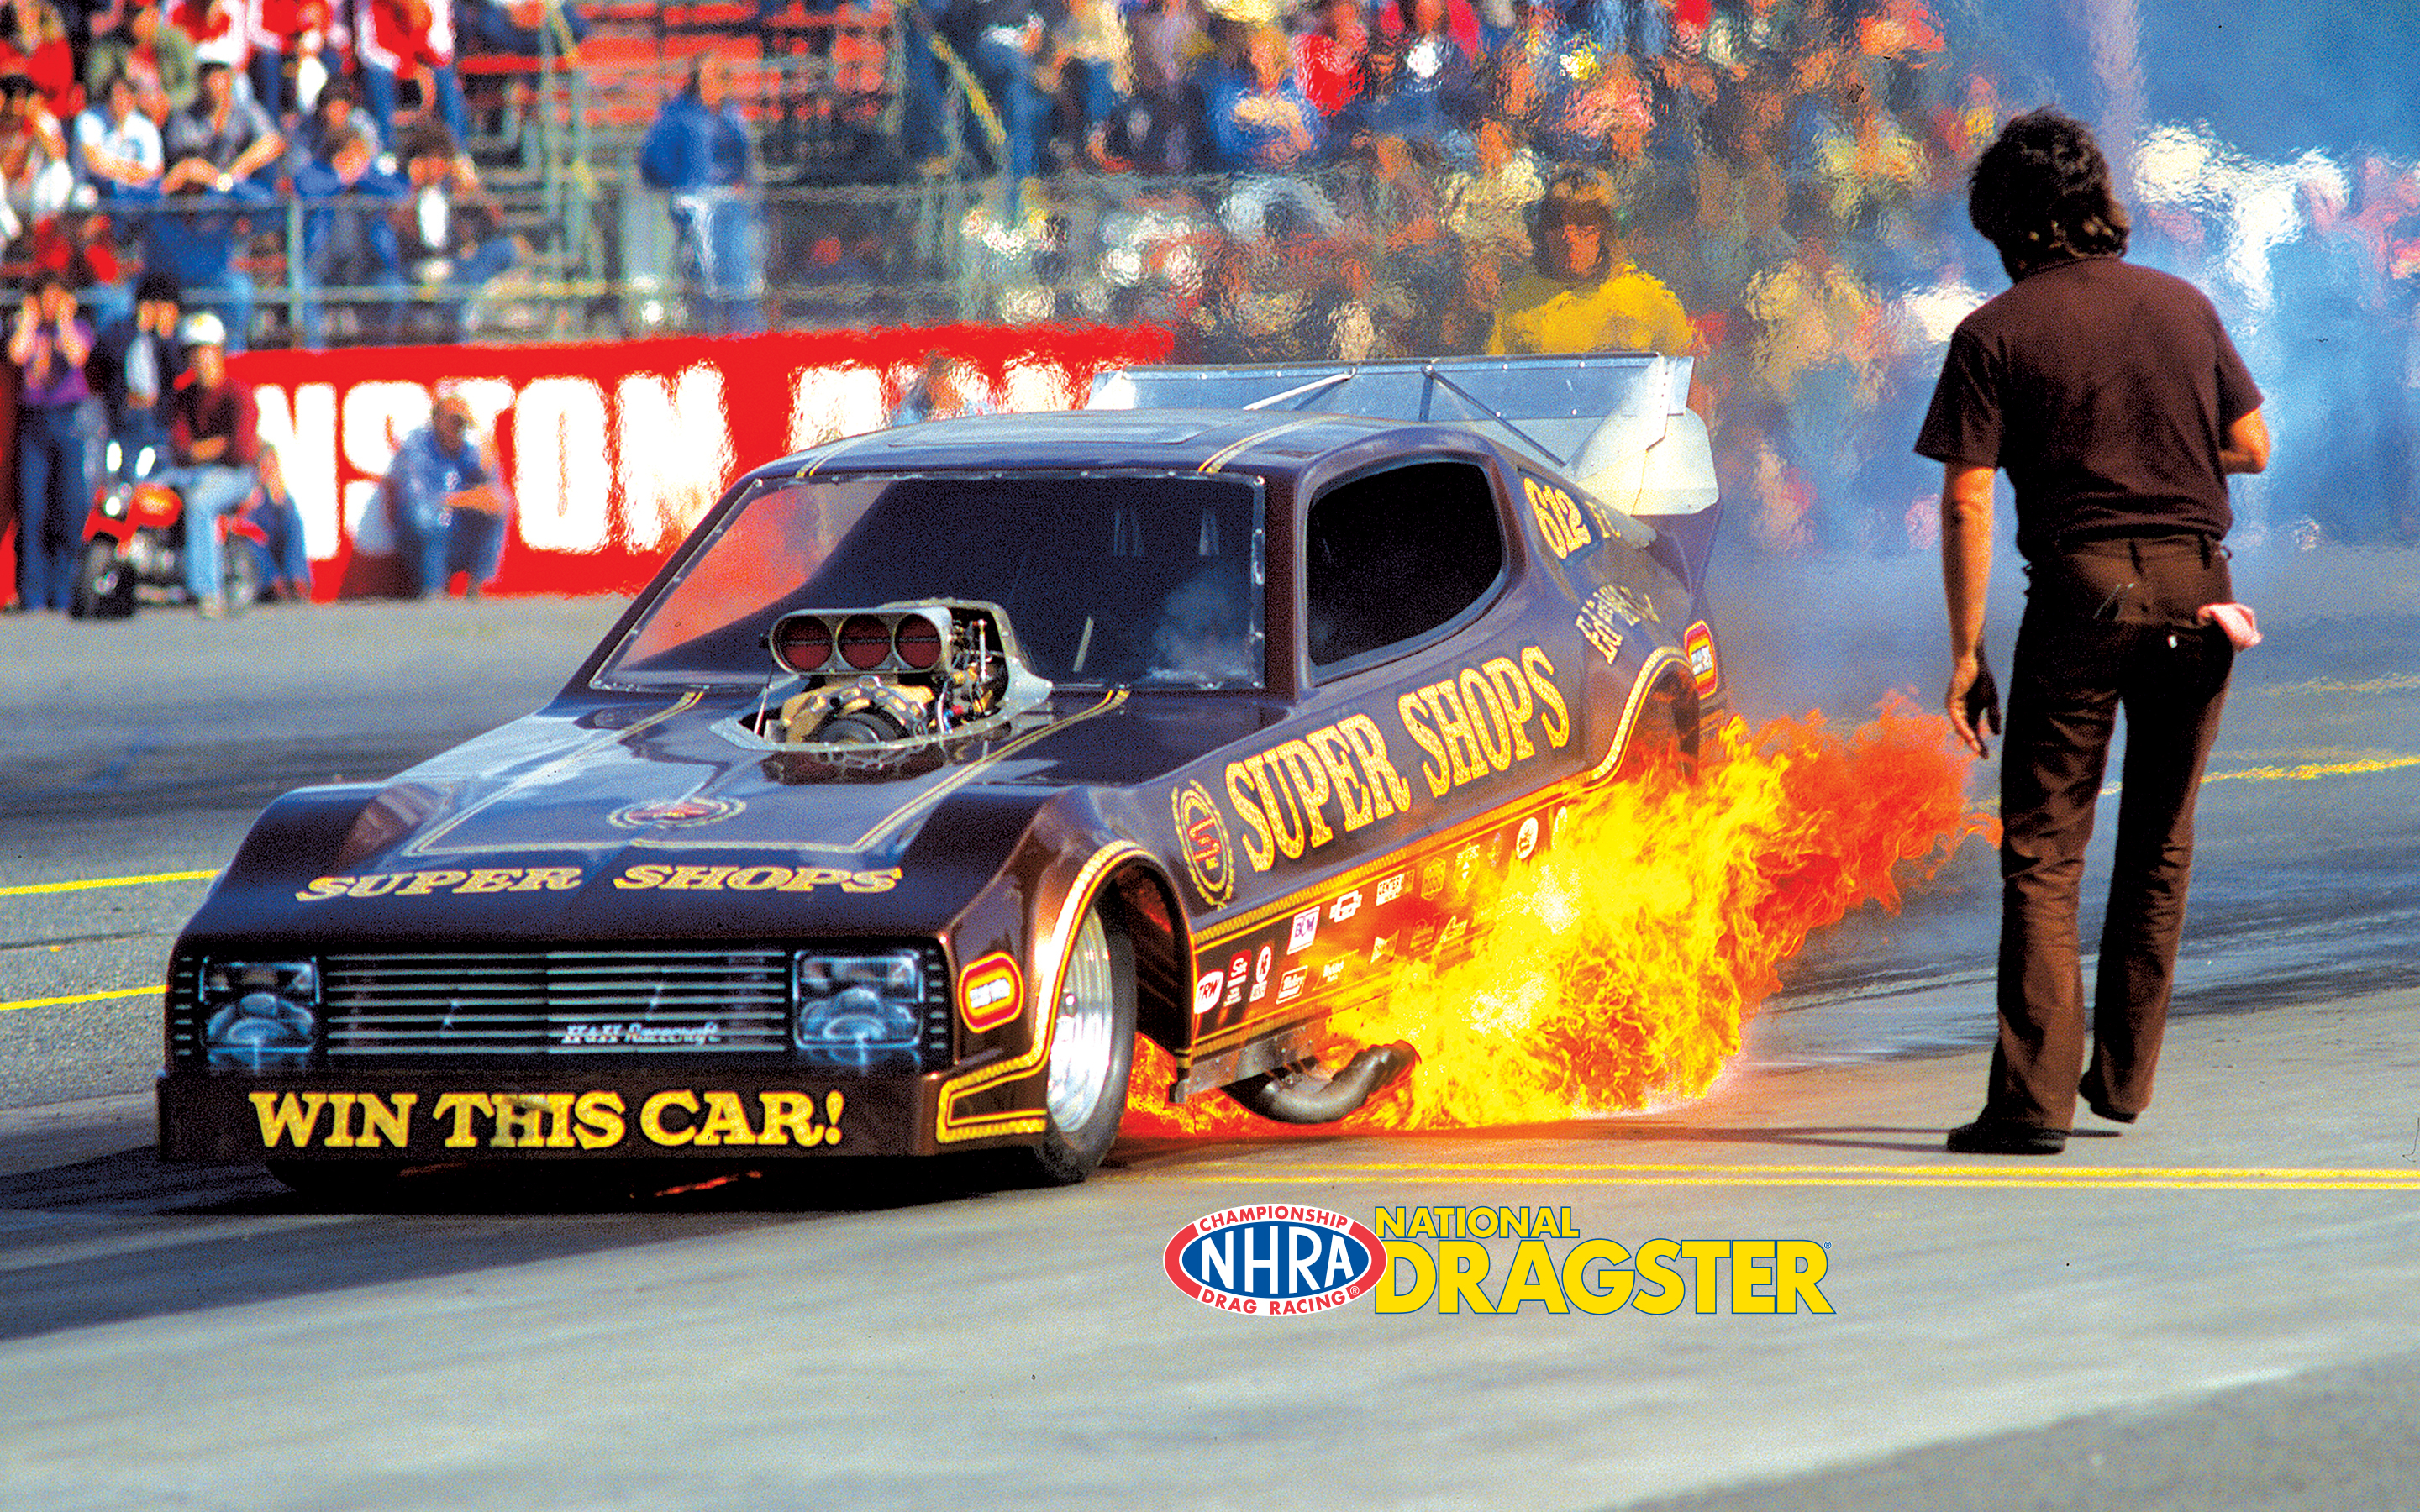 2880x1800 NHRA National Dragster wallpaper images (Issue 10, 2020) | NHRA